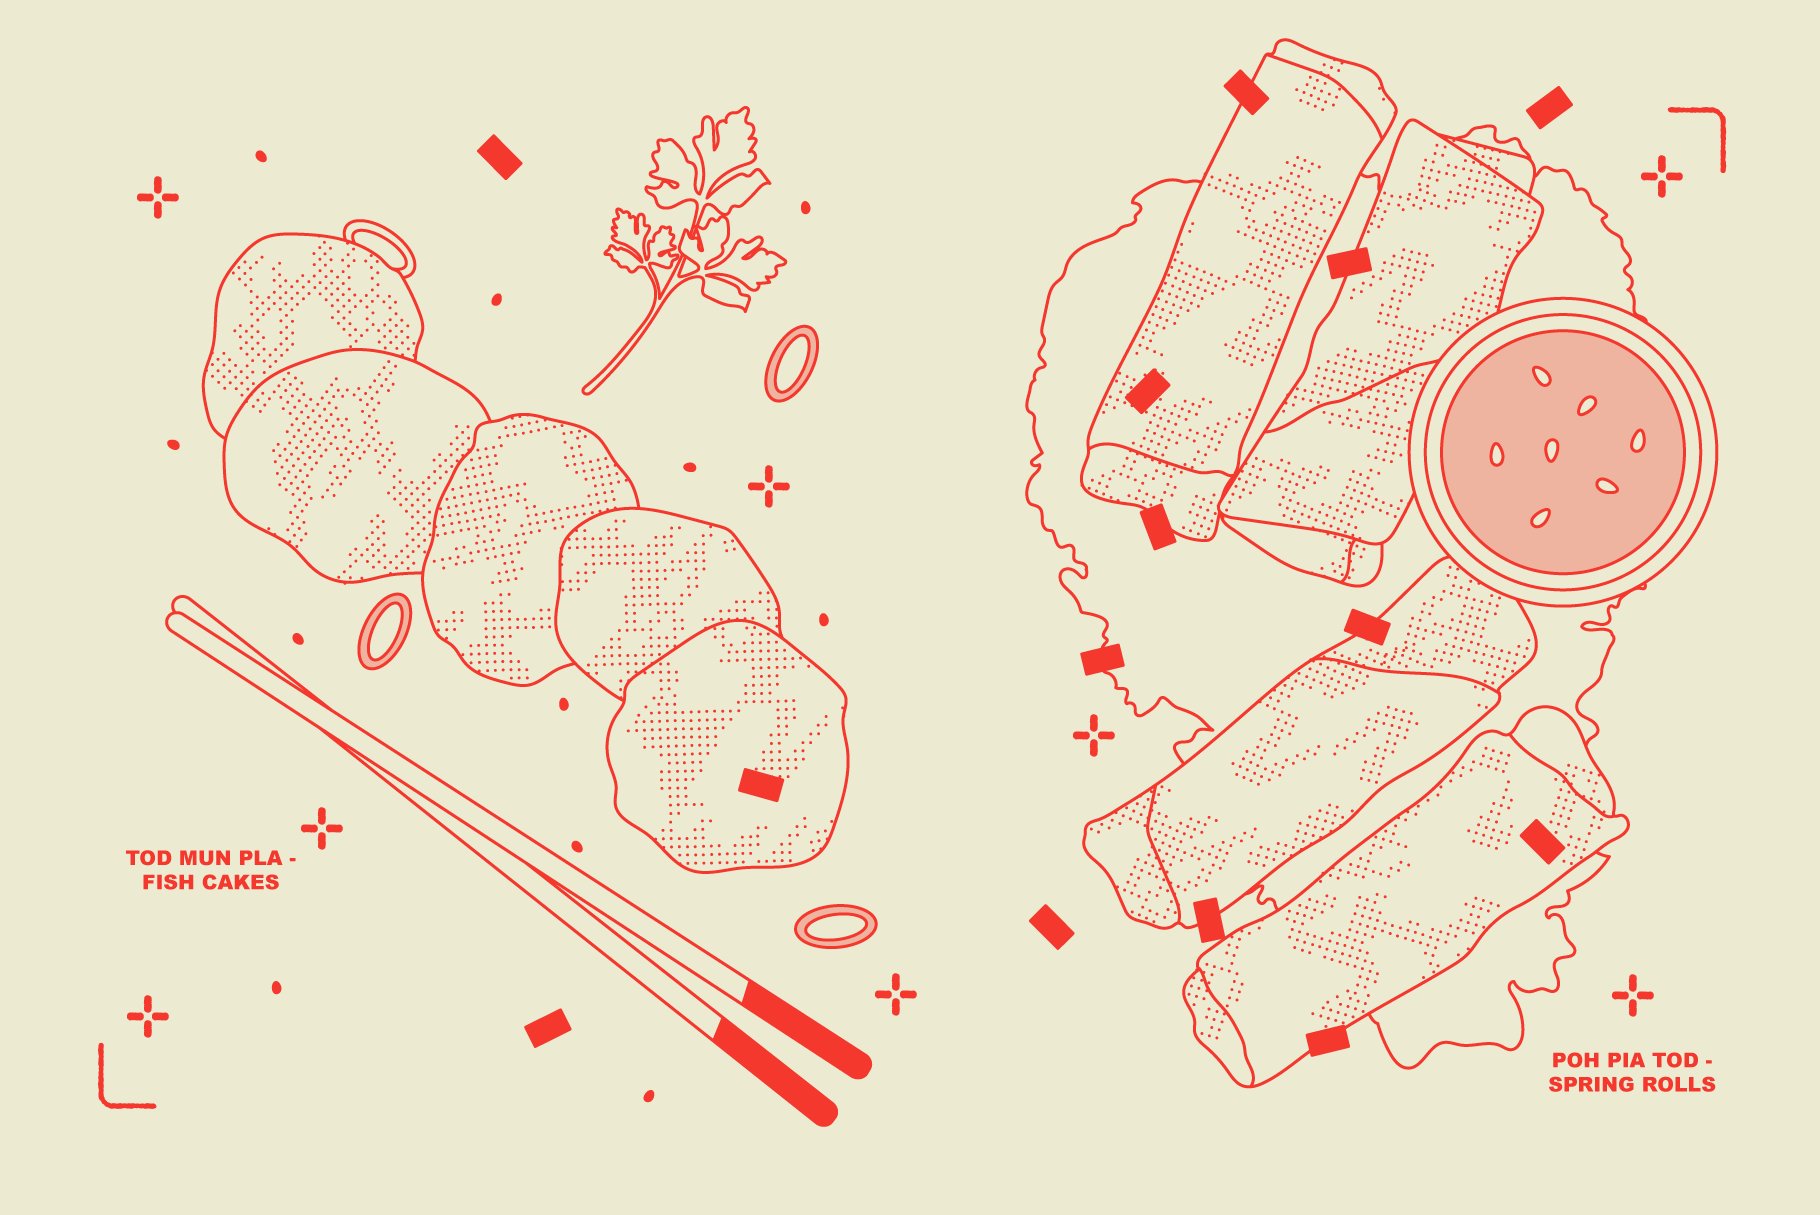 Tasty and spicy Thai food illustrations are ready for you.